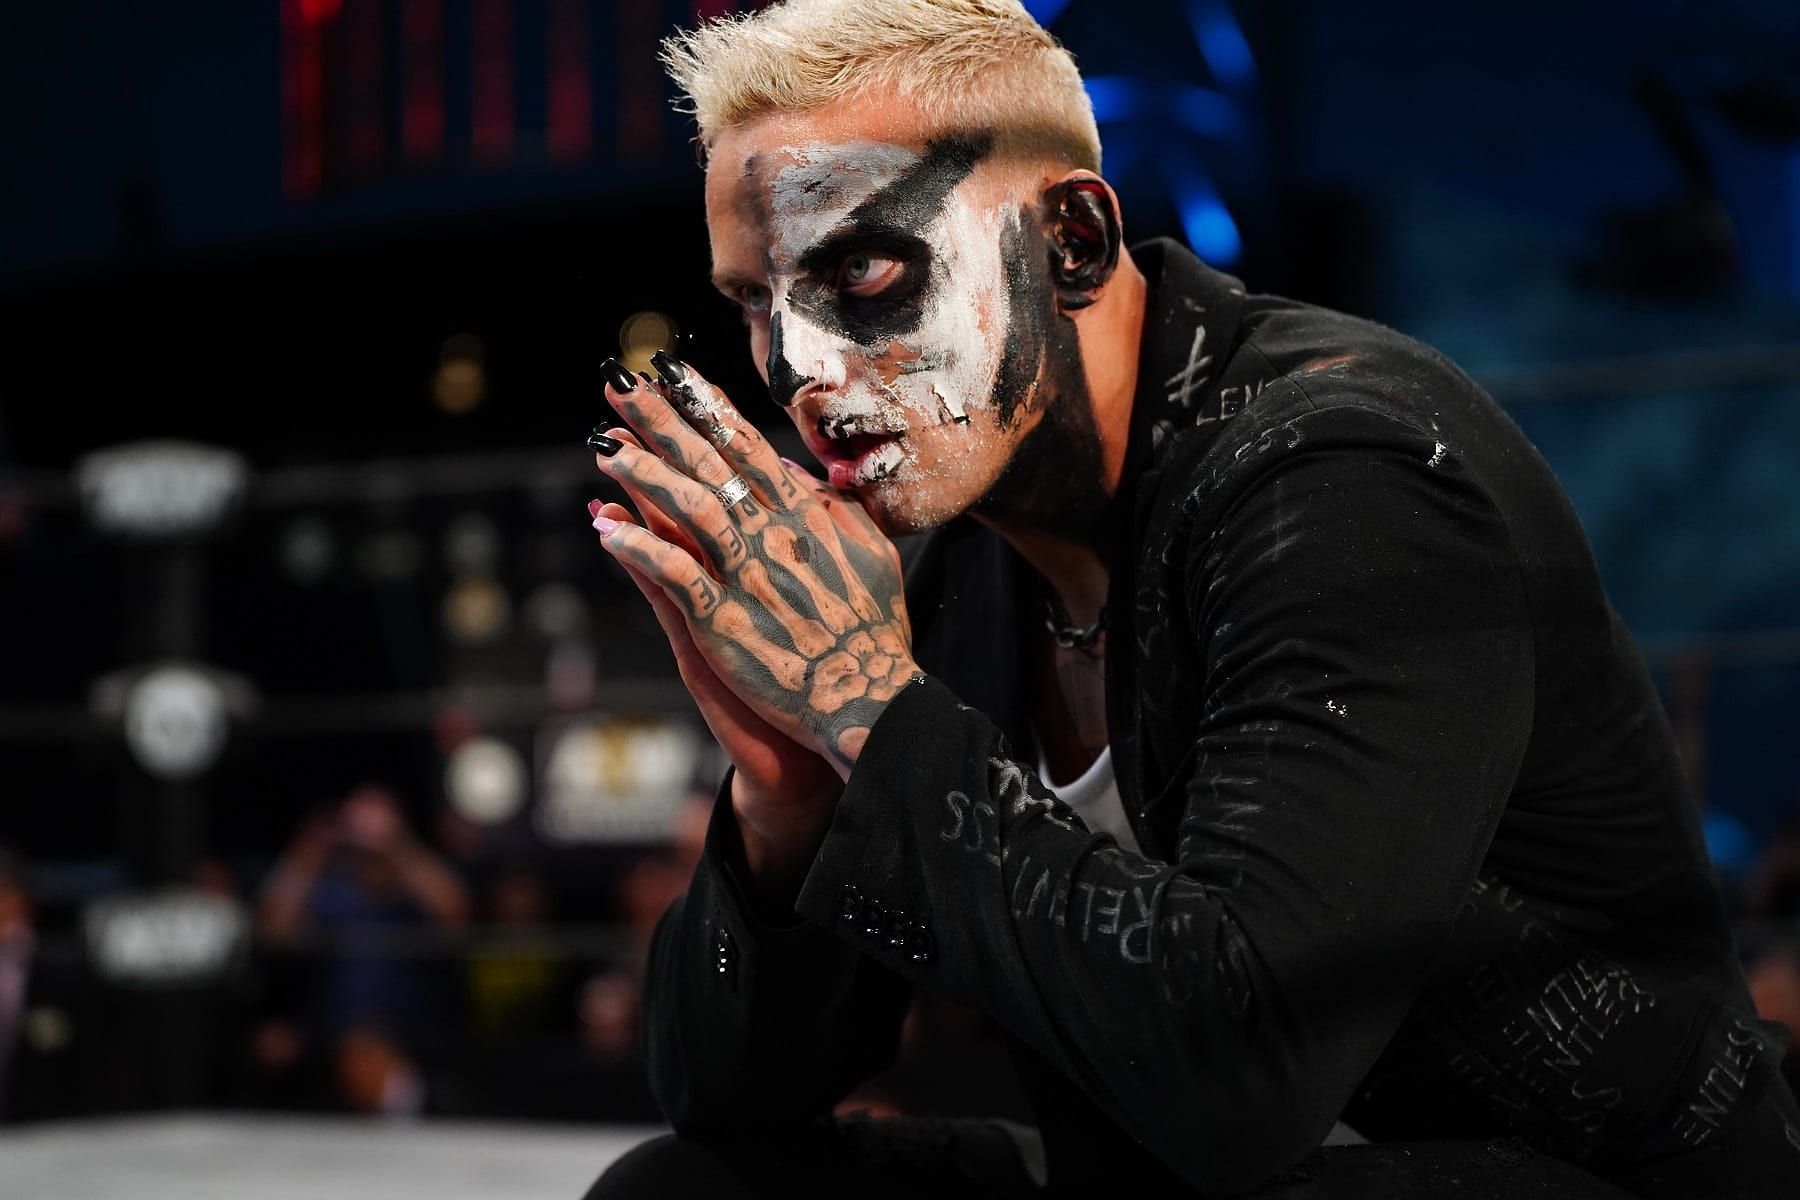 <div></noscript>5 things you didn't know about AEW star Darby Allin</div>